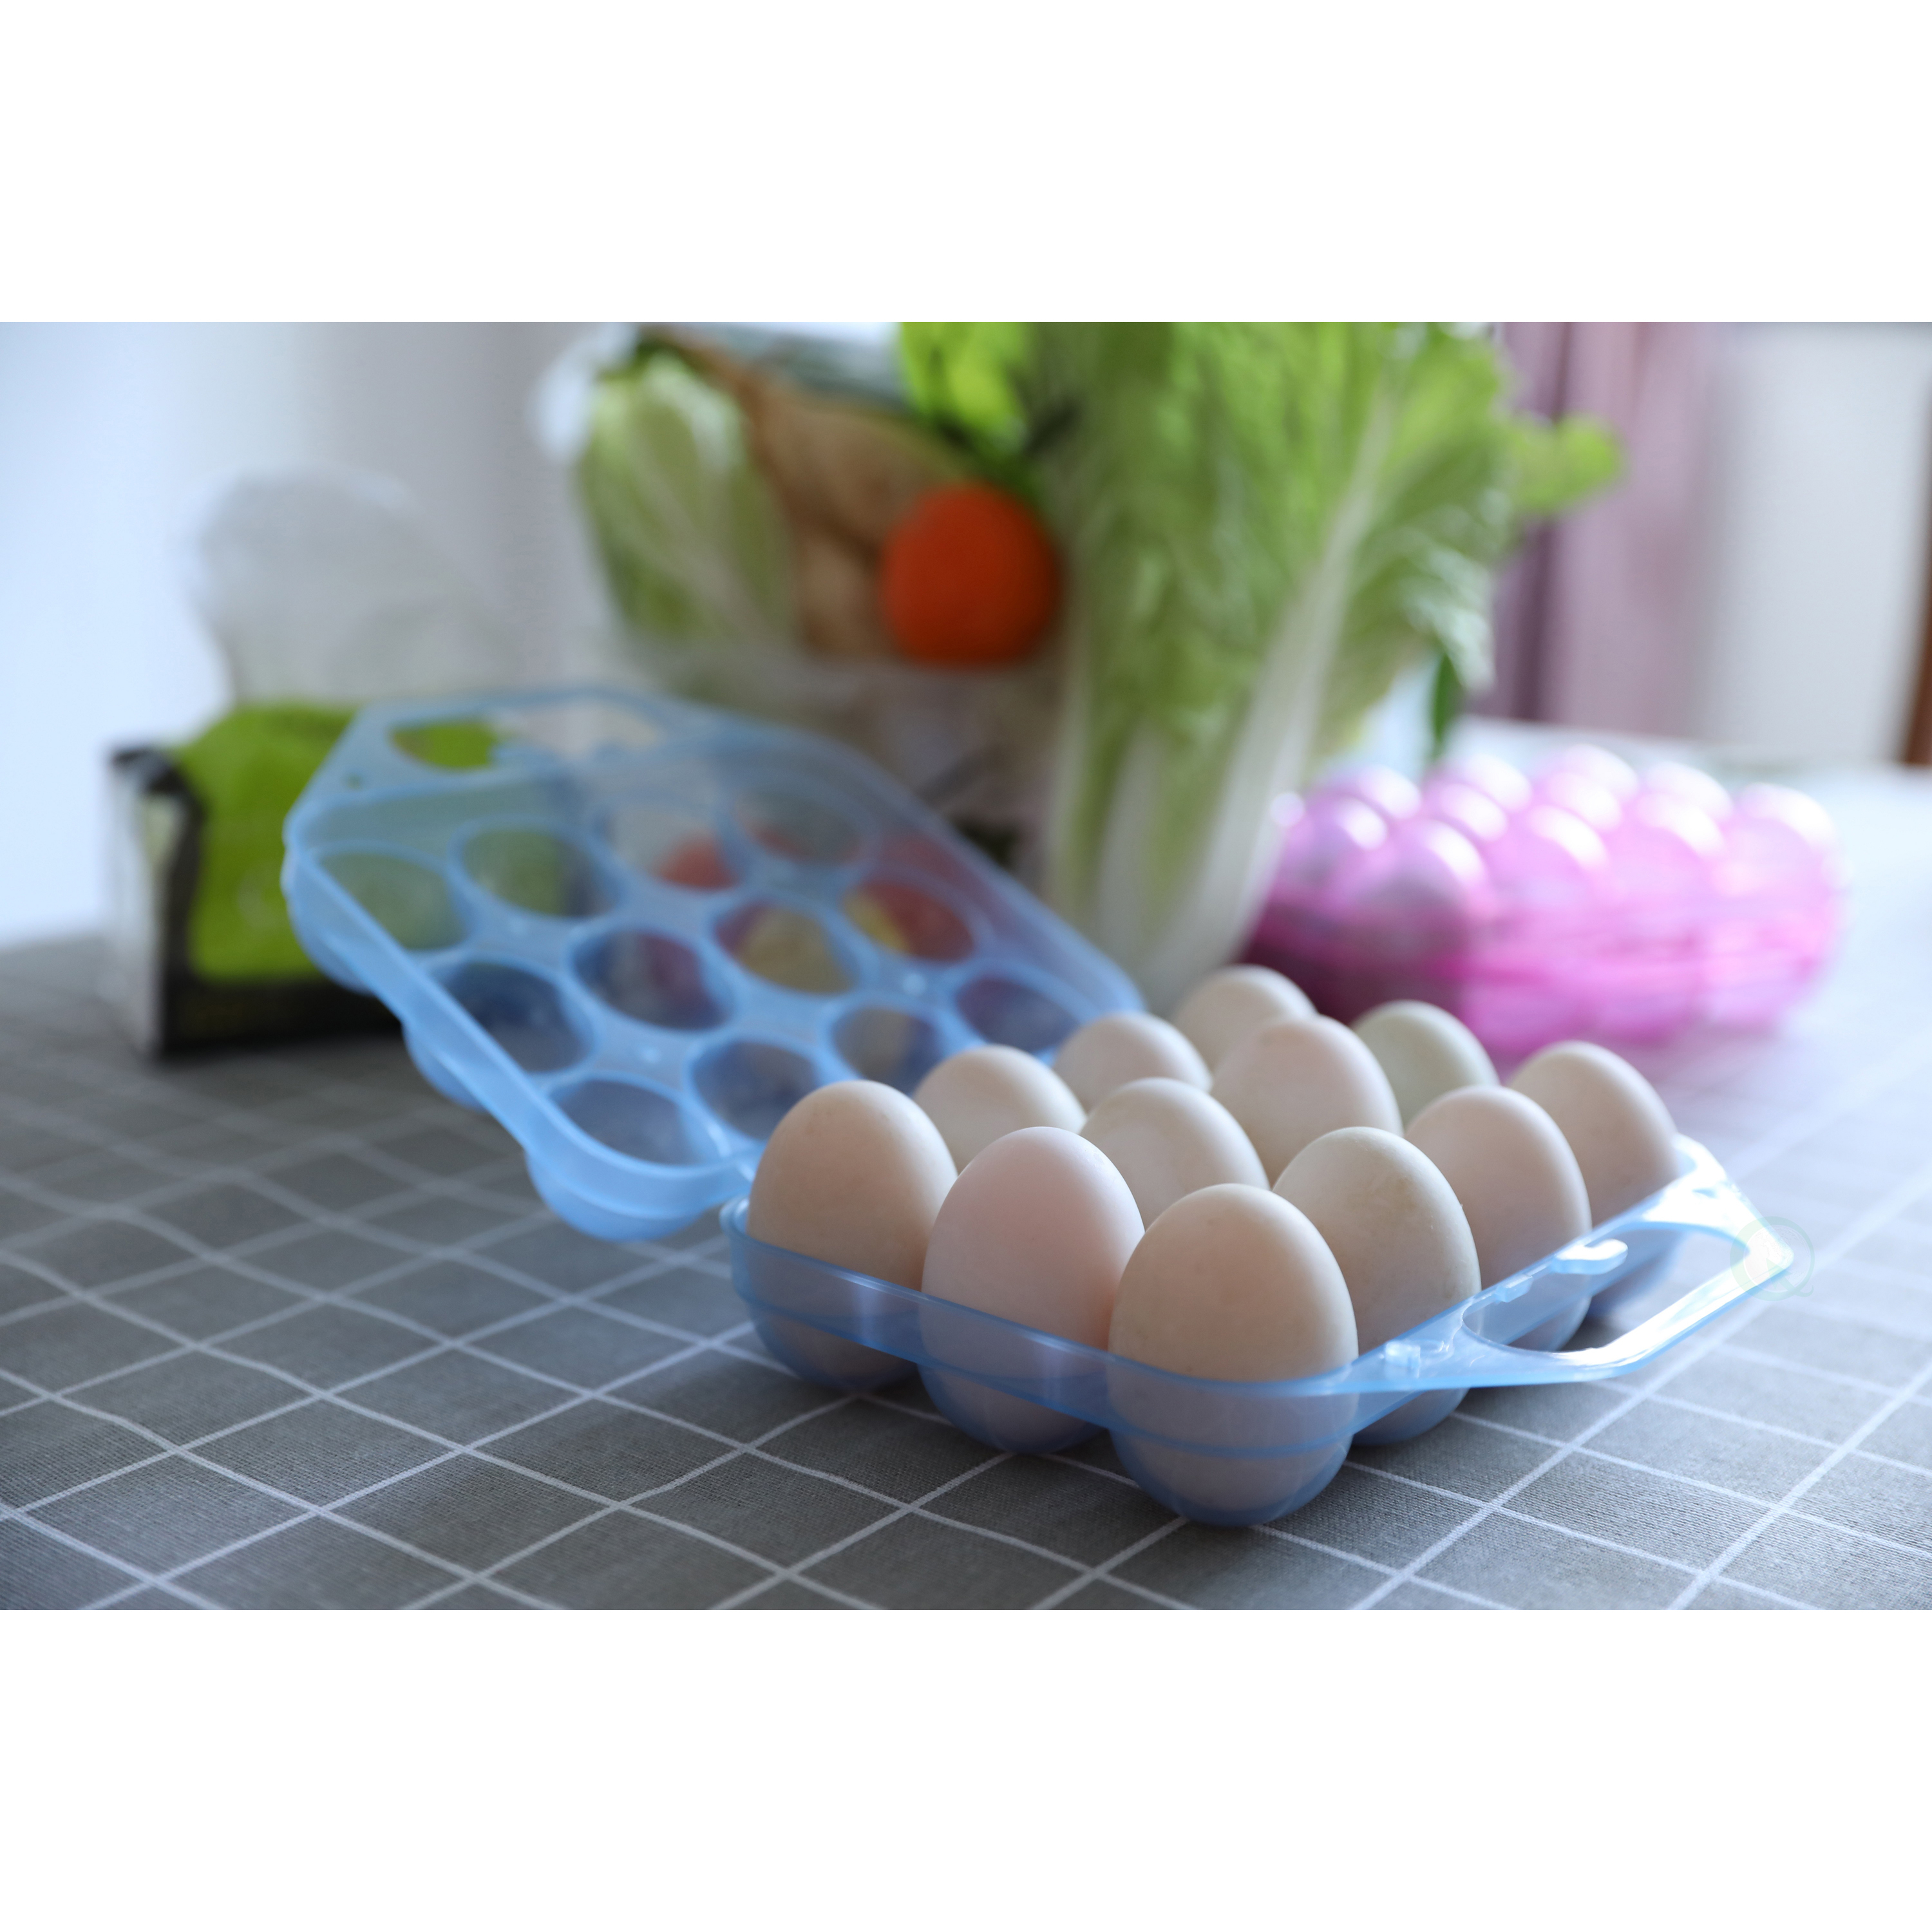 Clear Plastic Egg Carton-12 Egg Holder Carrying Case With Handle - Blue